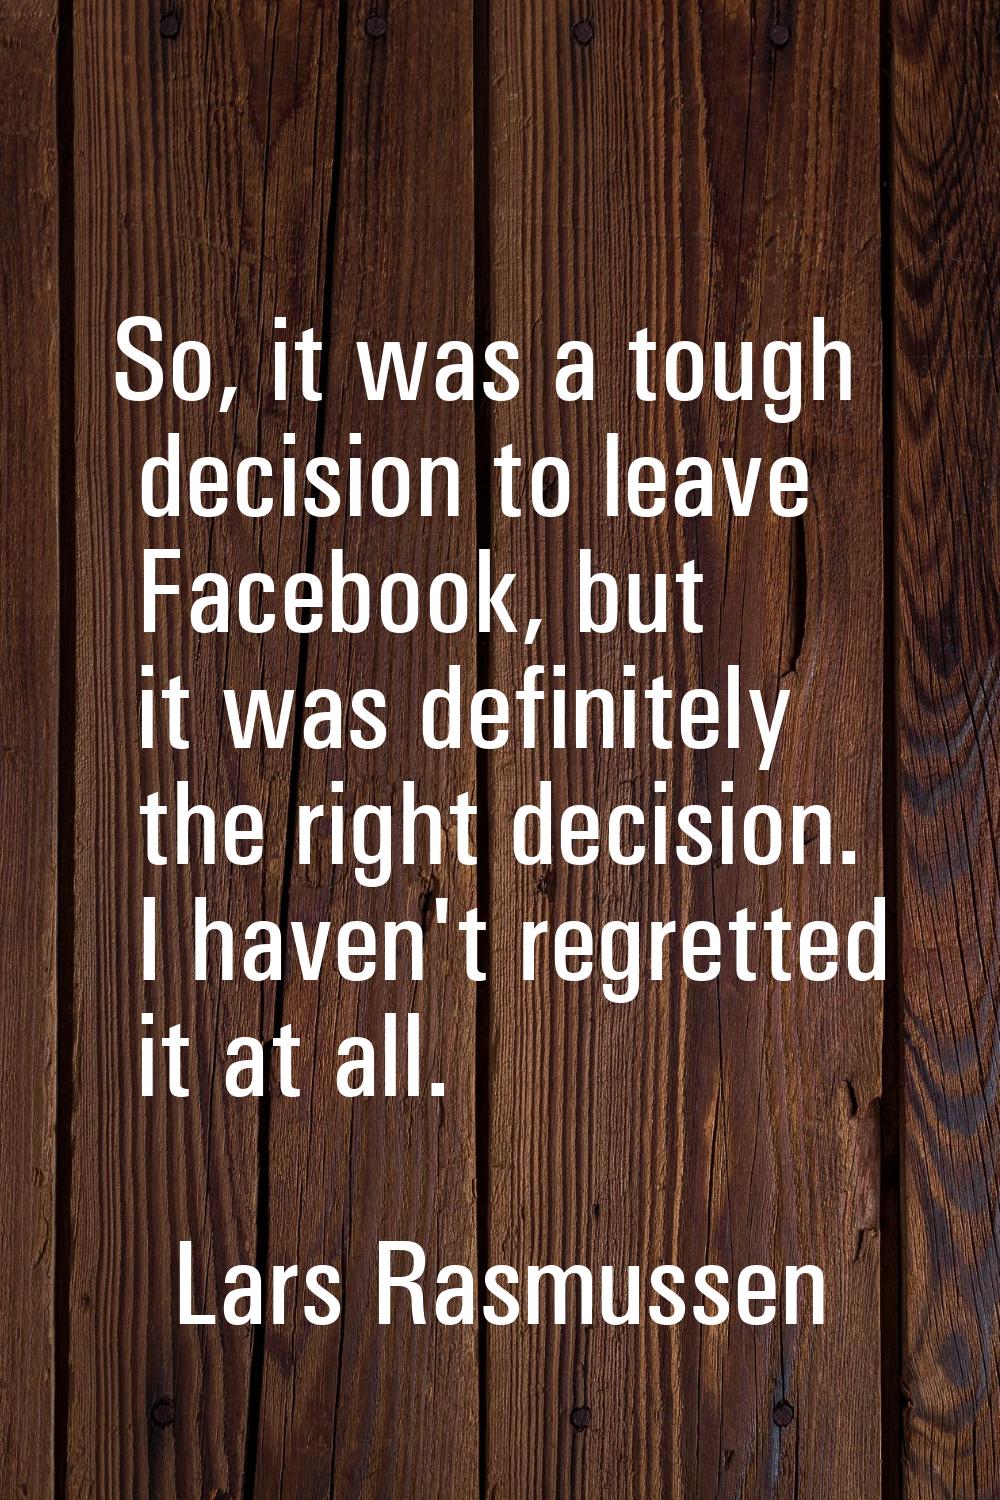 So, it was a tough decision to leave Facebook, but it was definitely the right decision. I haven't 